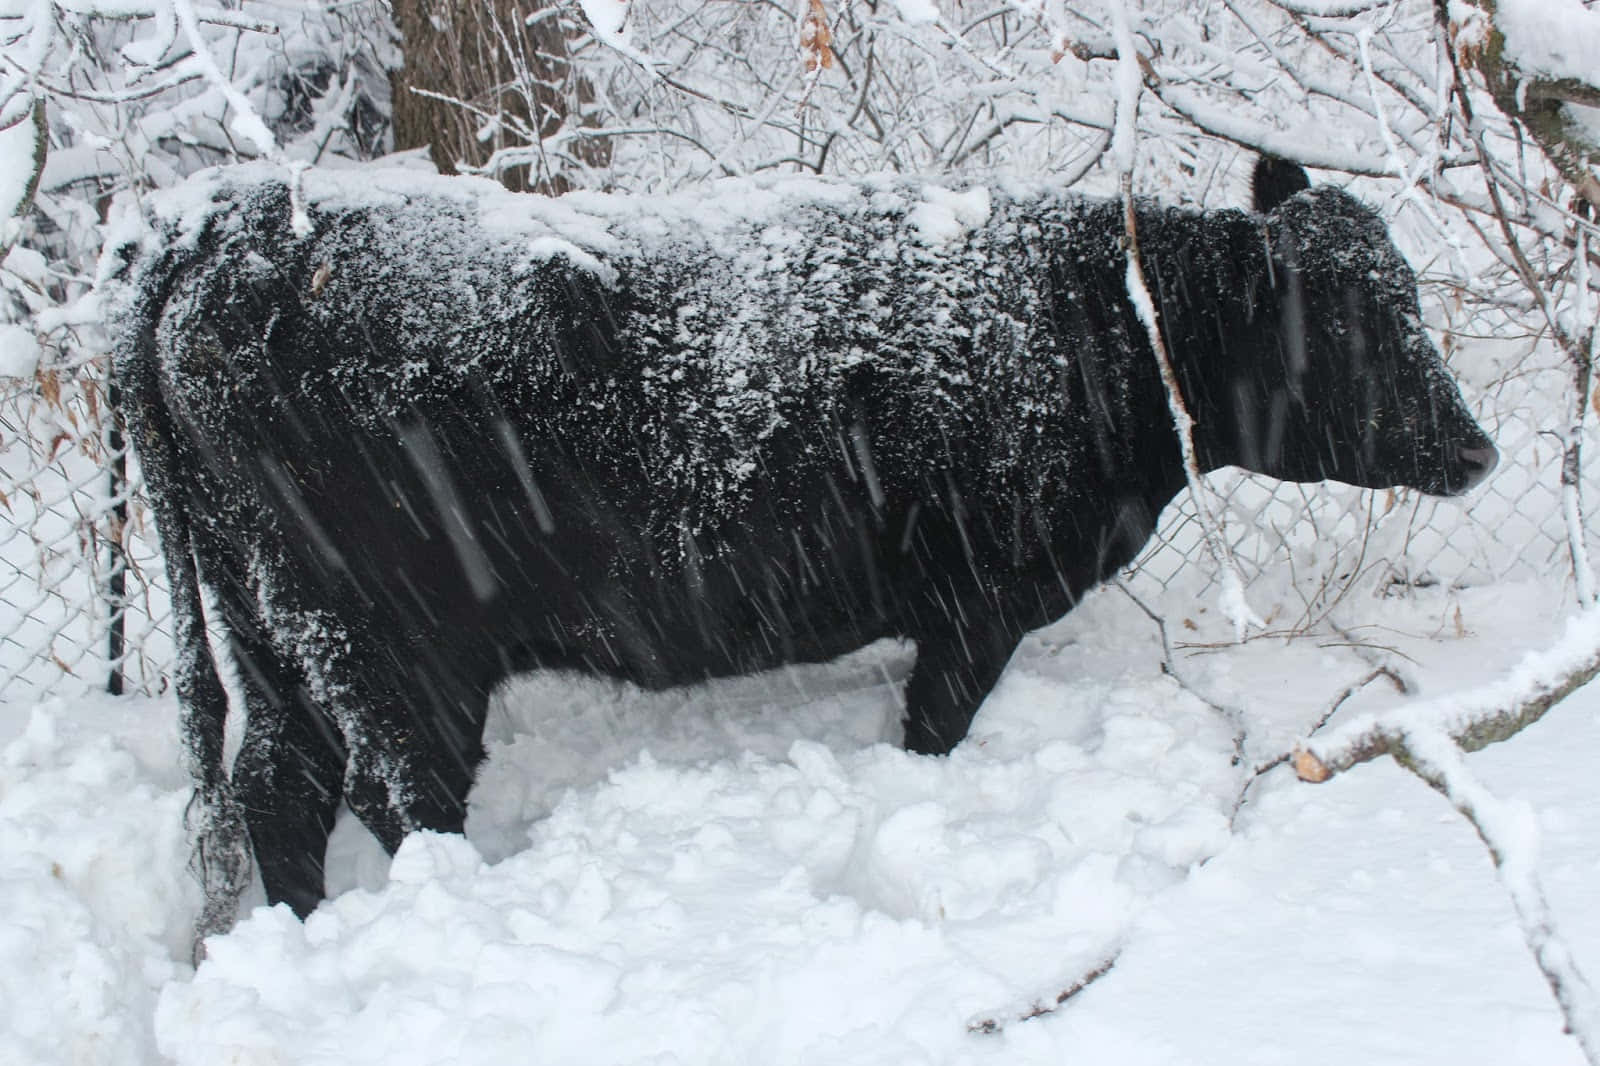 A Black Cow In The Snow